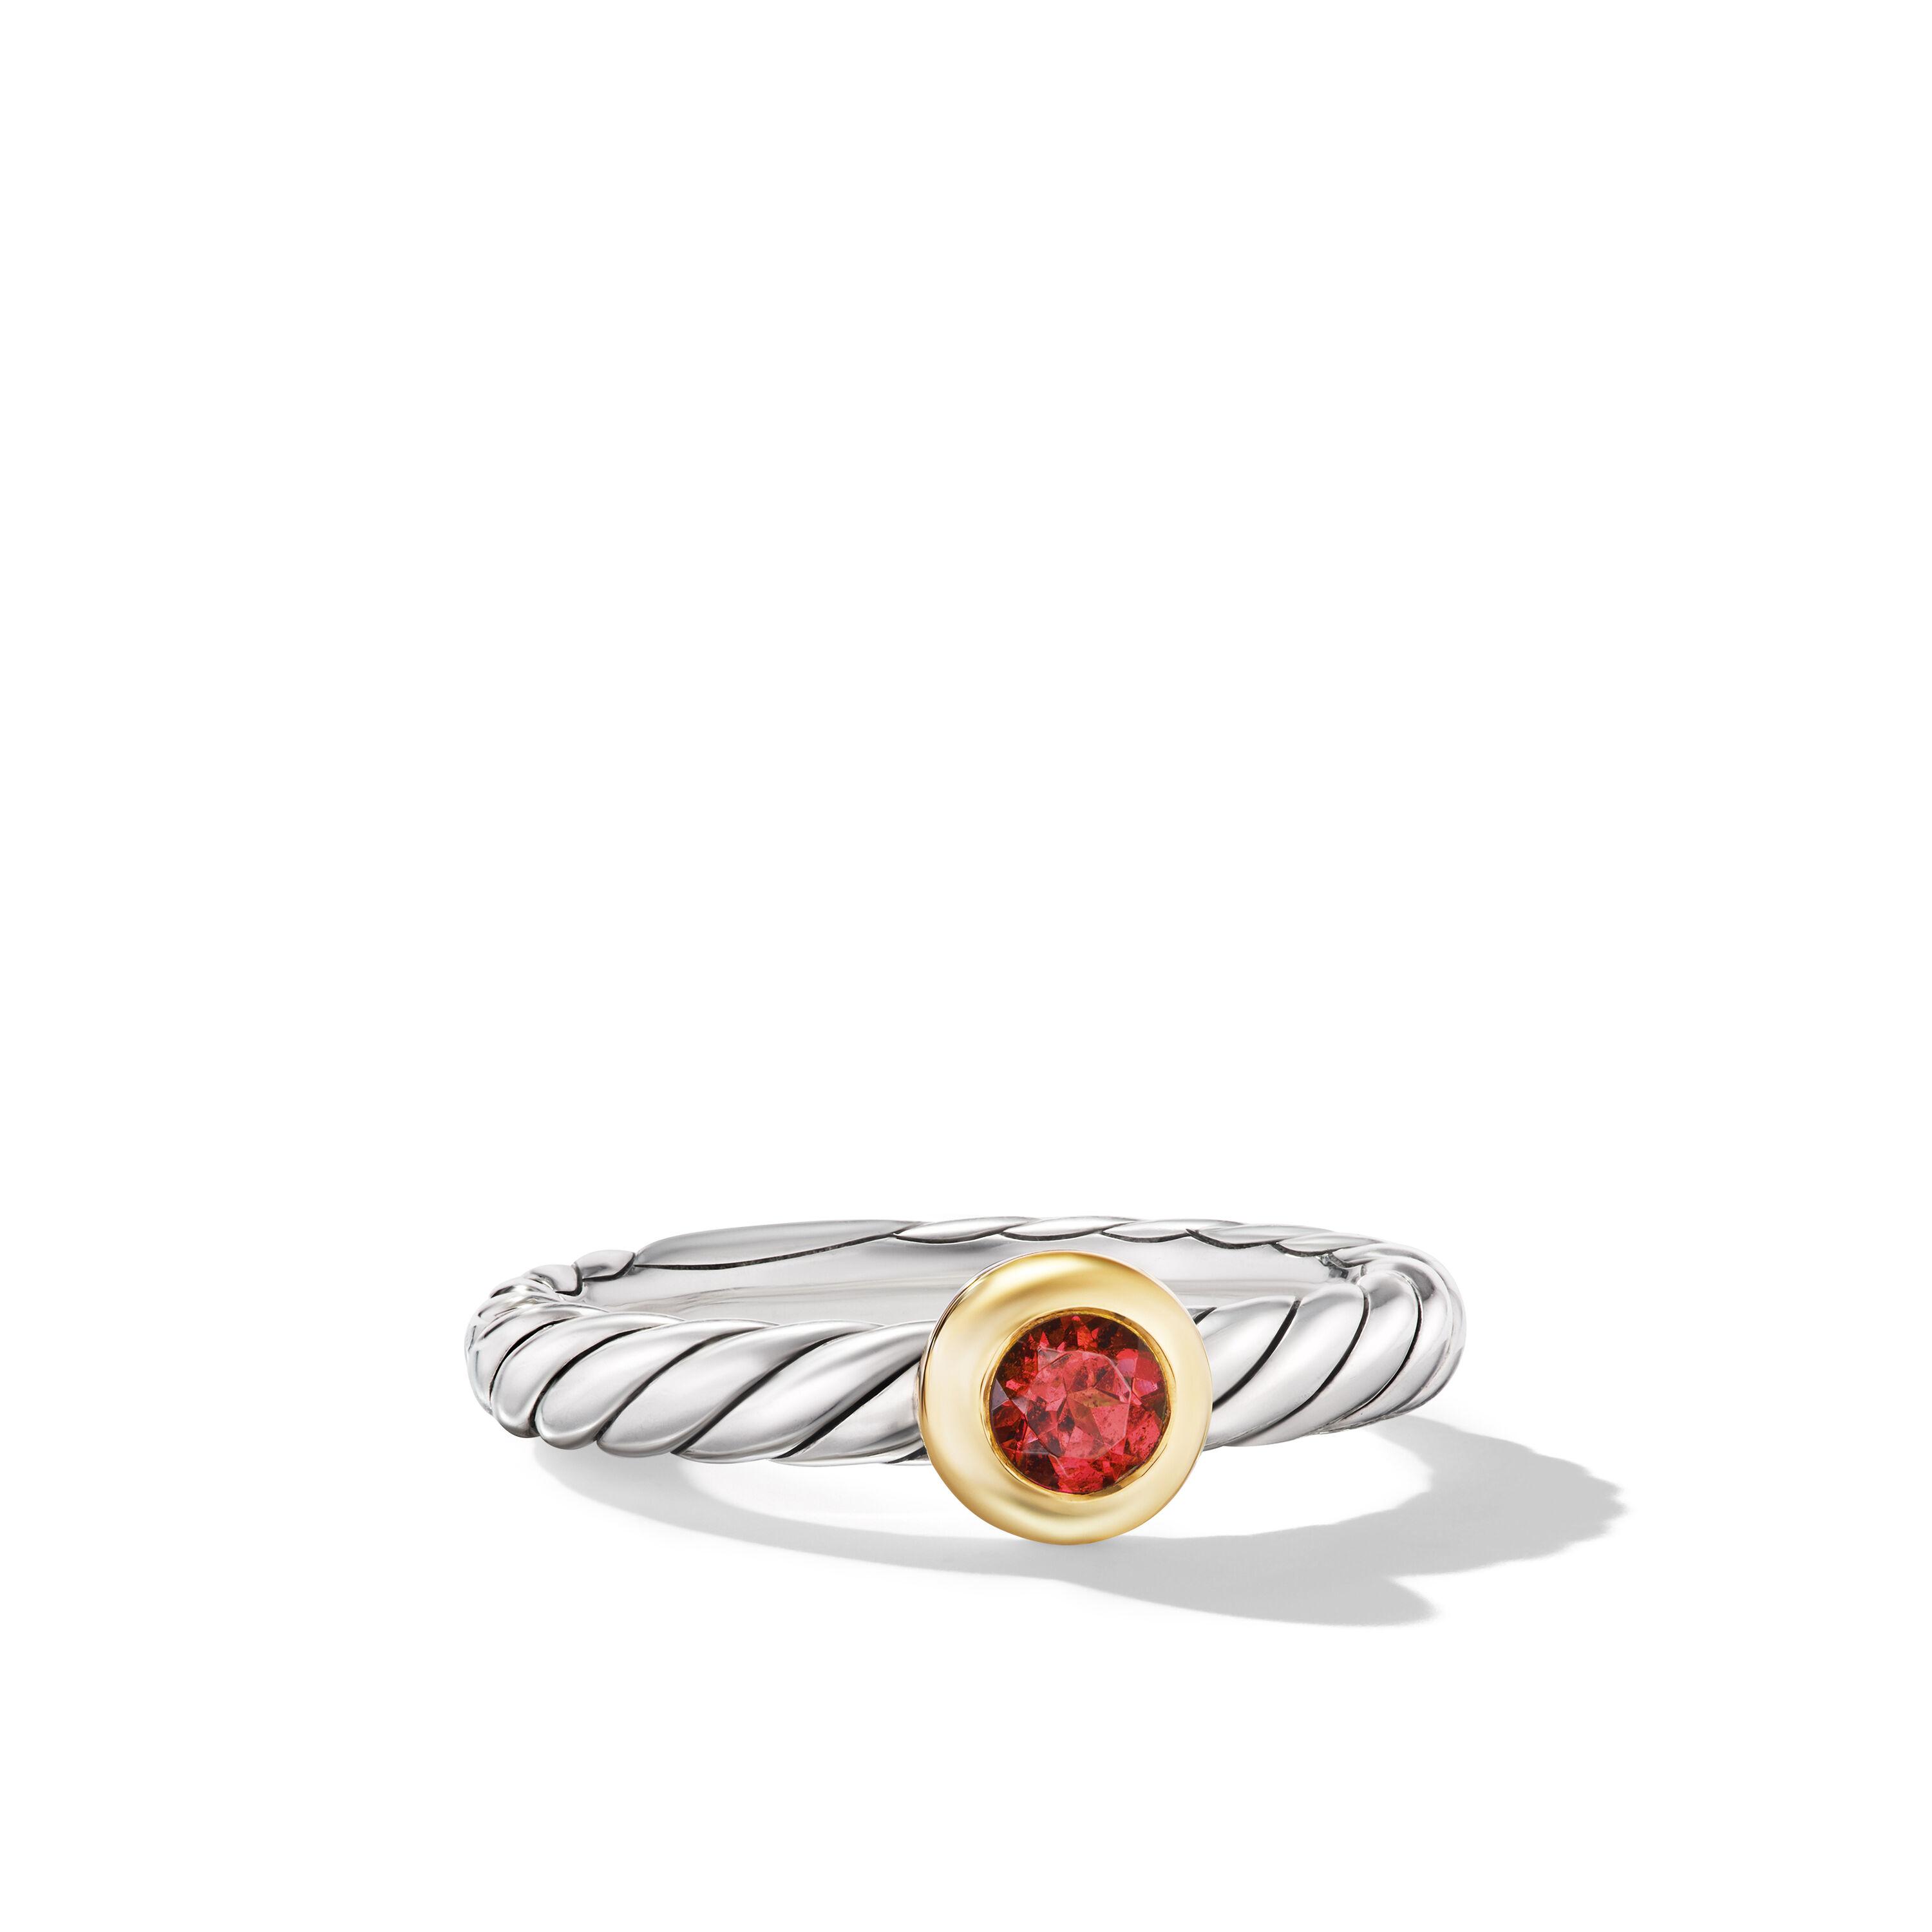 David Yurman Petite Cable Ring in Sterling Silver with 14K Yellow Gold and Garnet, Size 6 0